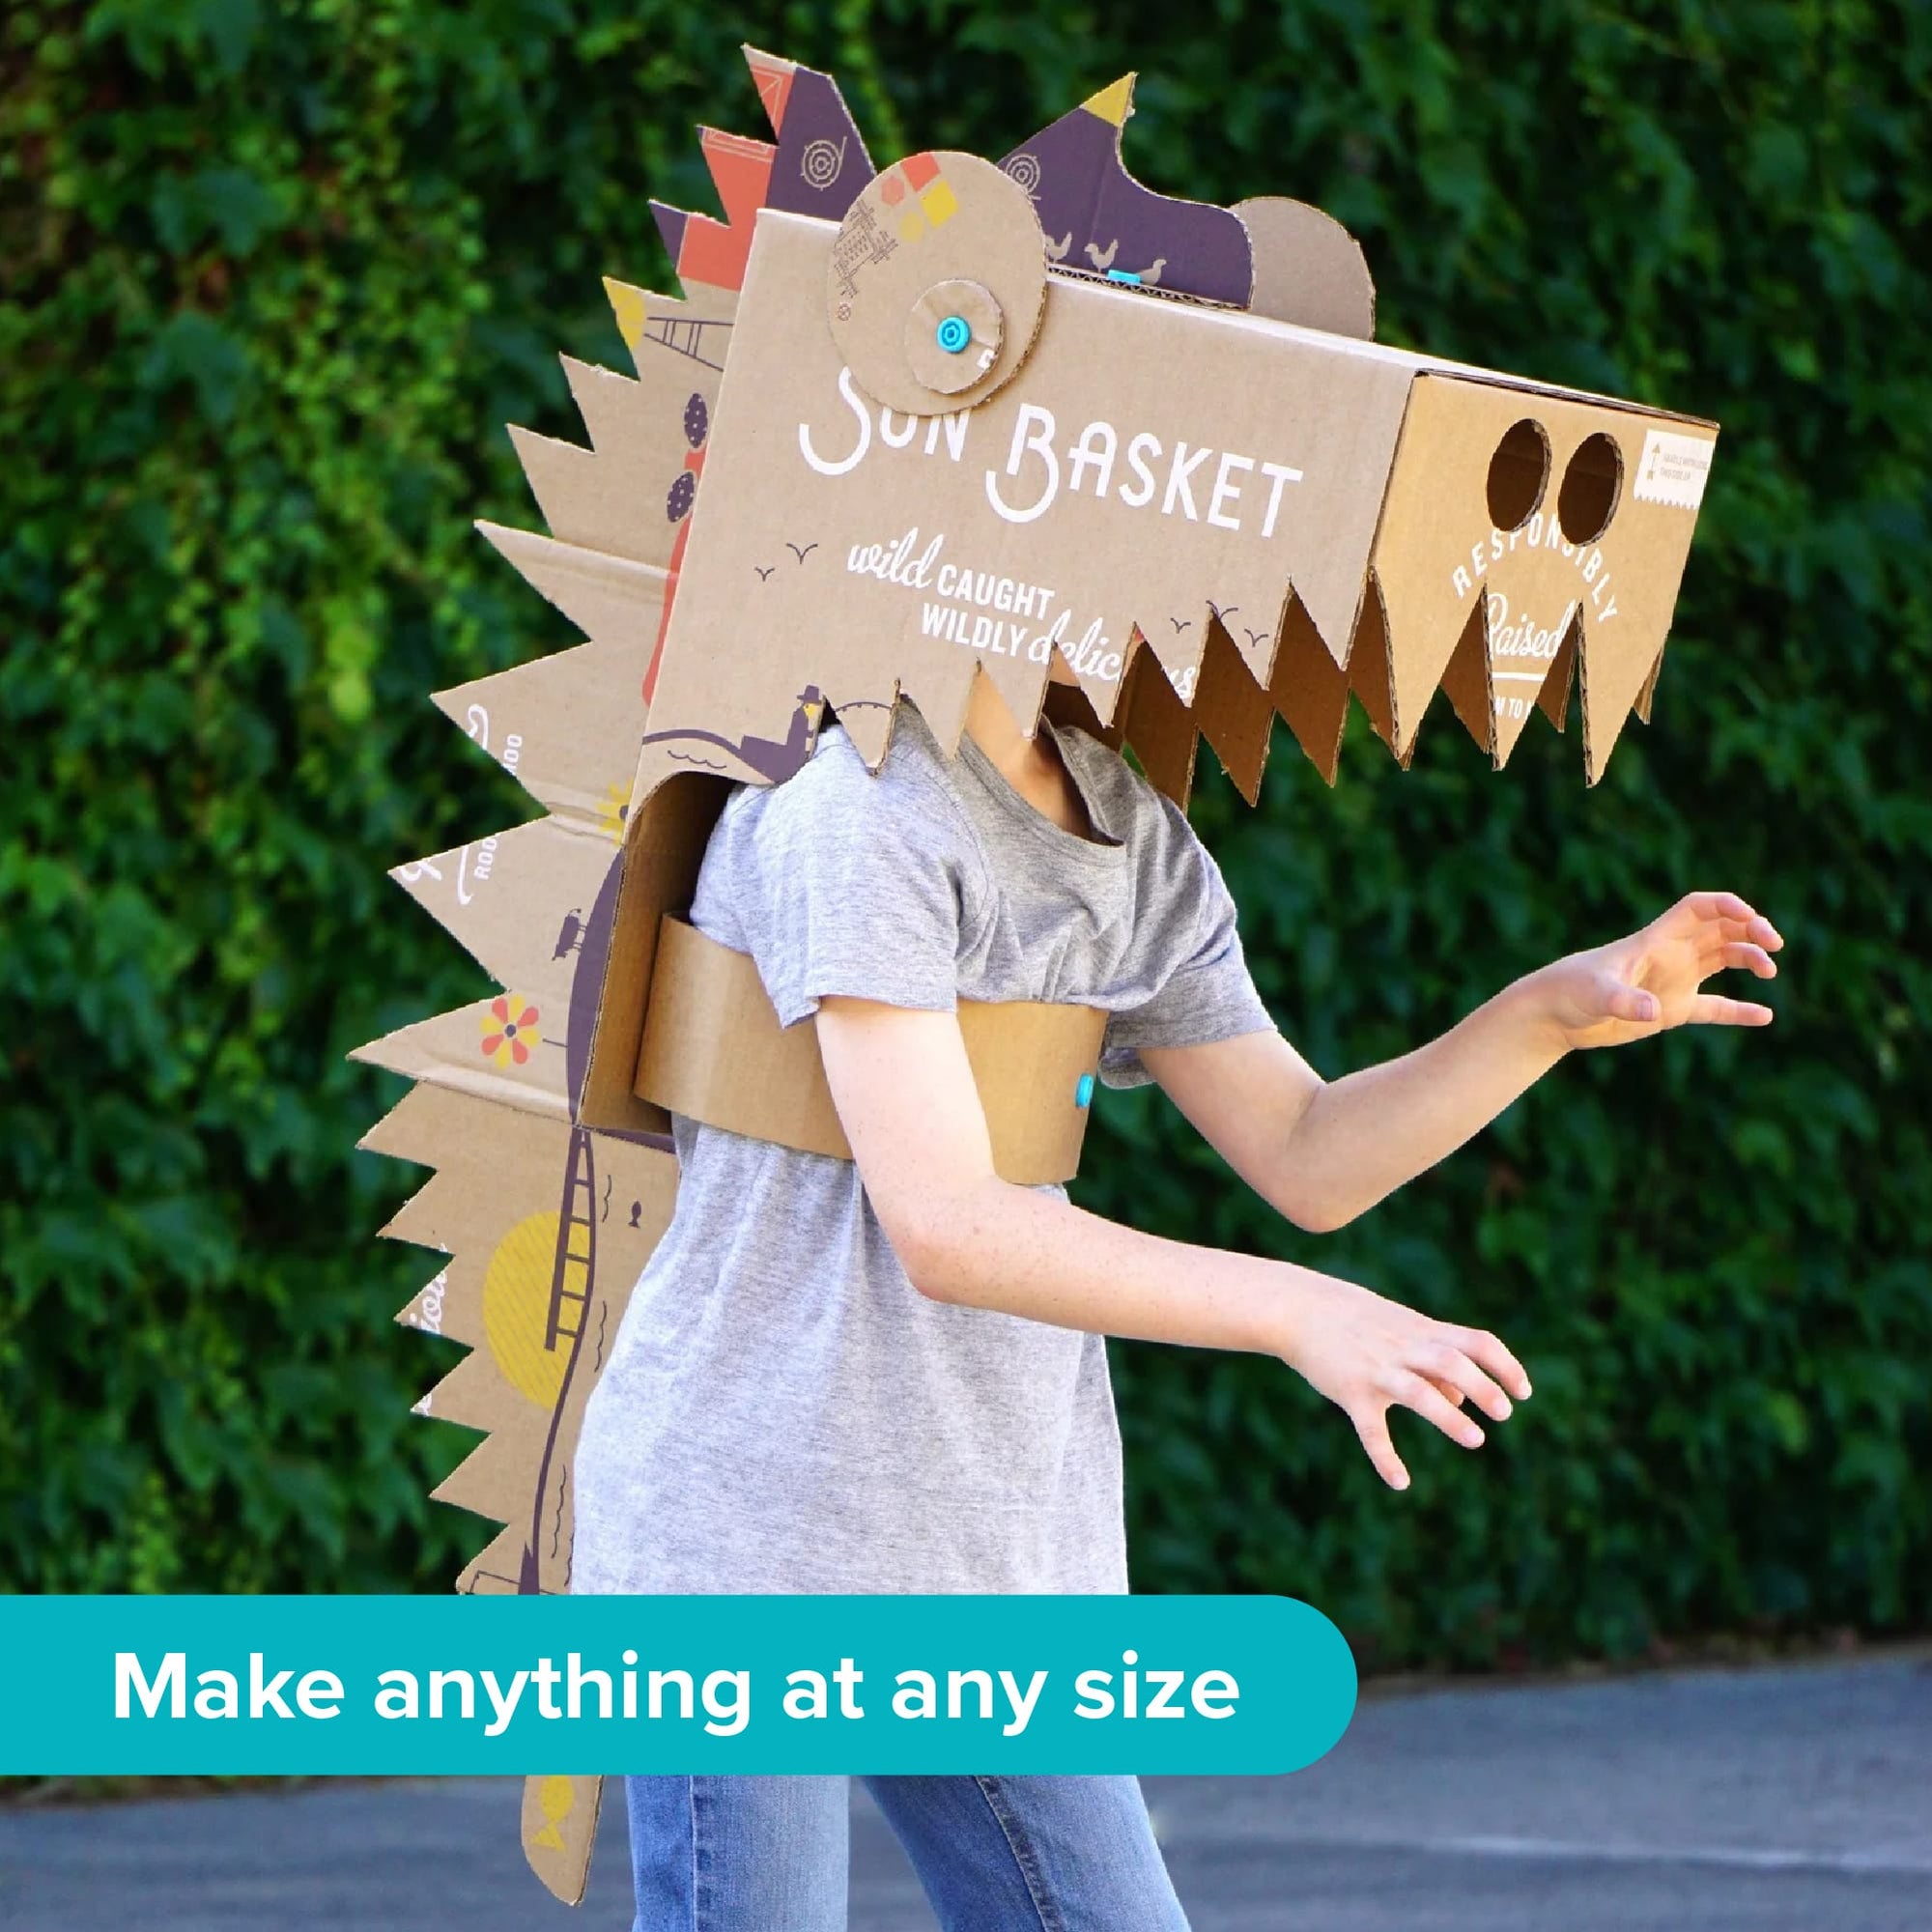 A' Design Award and Competition - Makedo Toolkit Cardboard Construction  System Press Kit